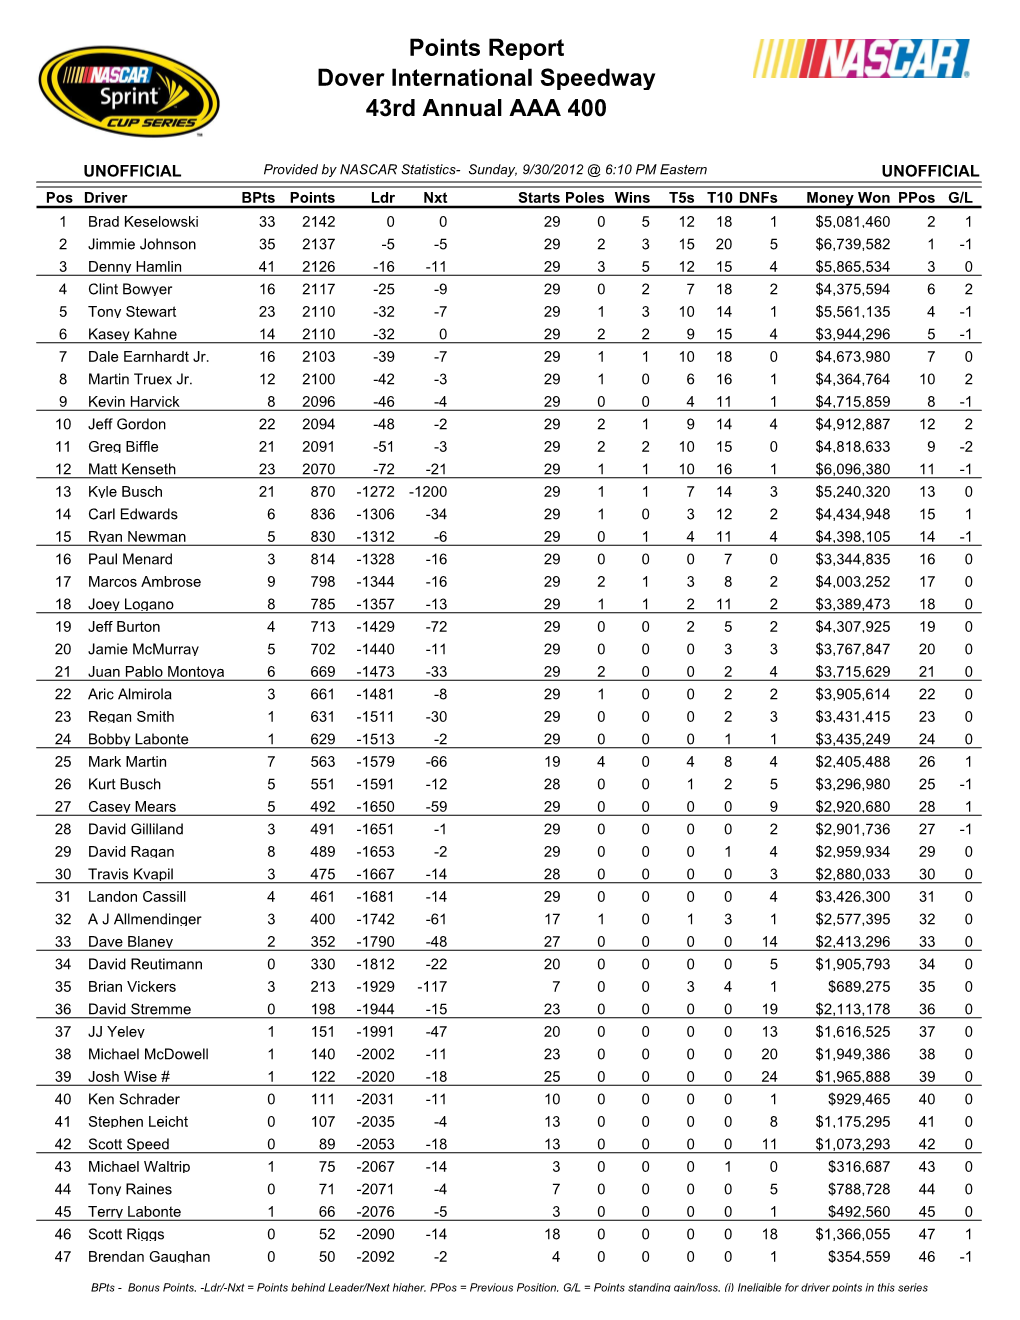 Points Report Dover International Speedway 43Rd Annual AAA 400